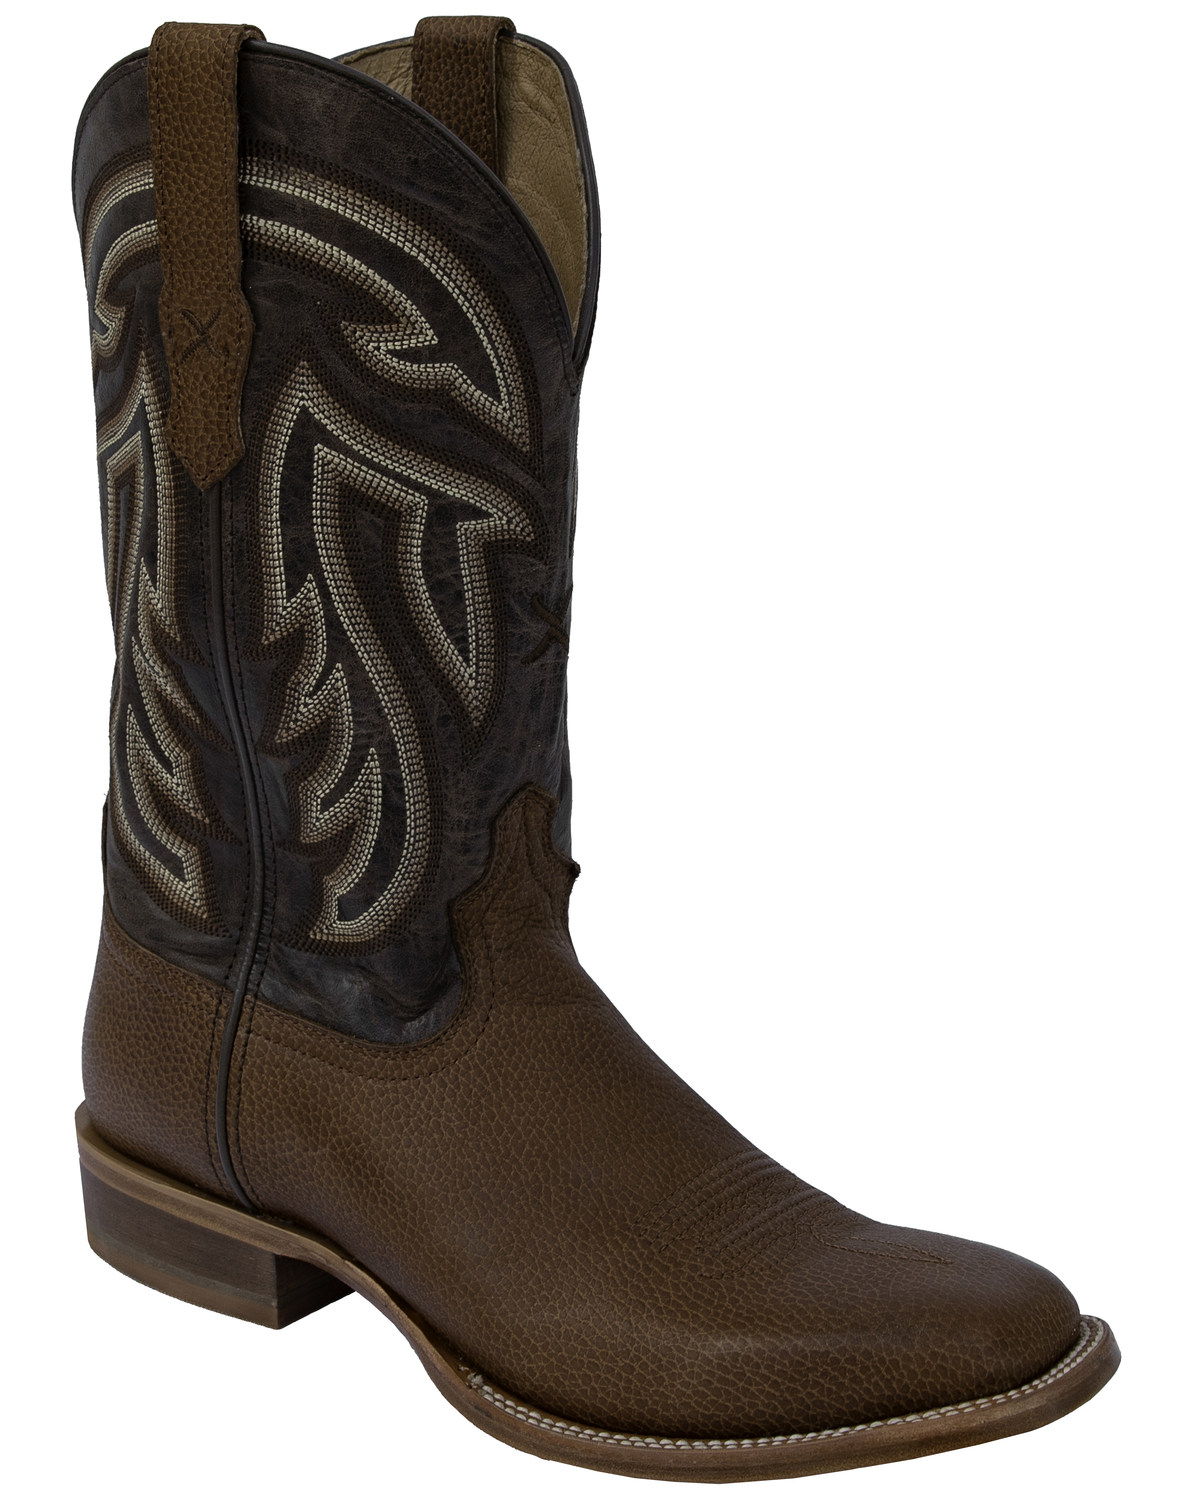 Twisted X Men's Rancher Western Boots